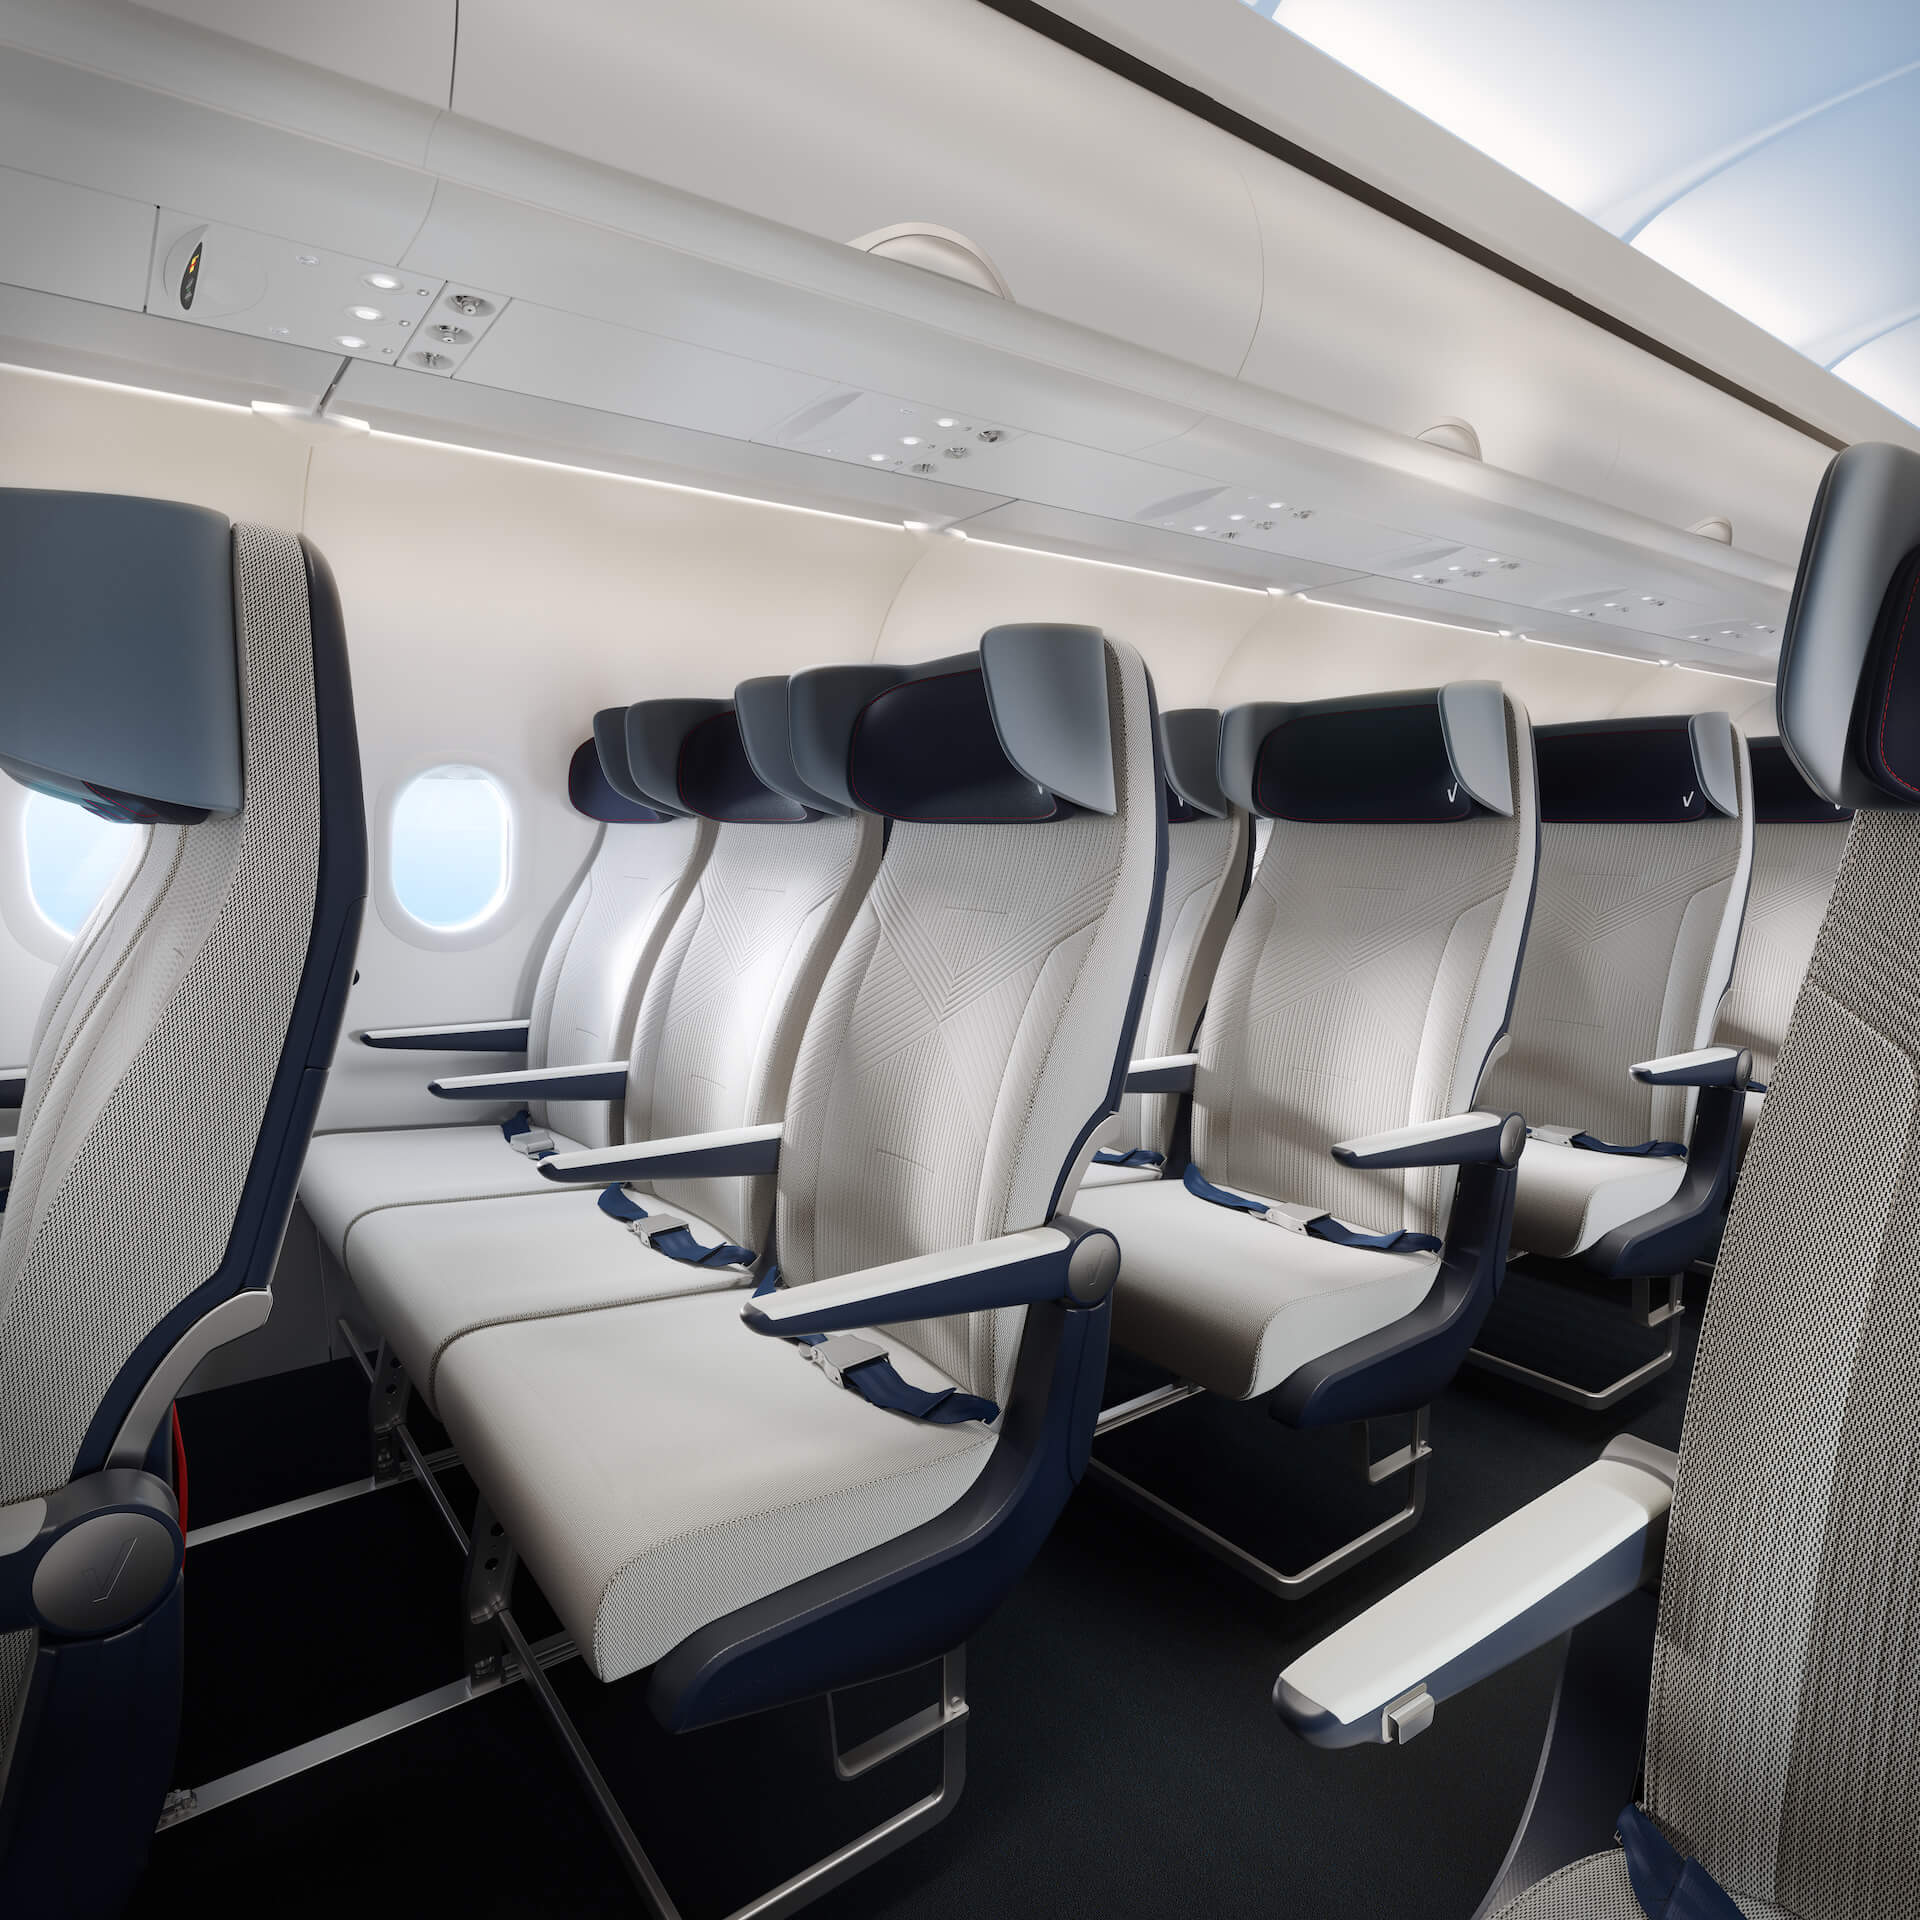 Side view of a row of economy class seats in contemporary light grey fabric with dark blue headrests with special privacy wings